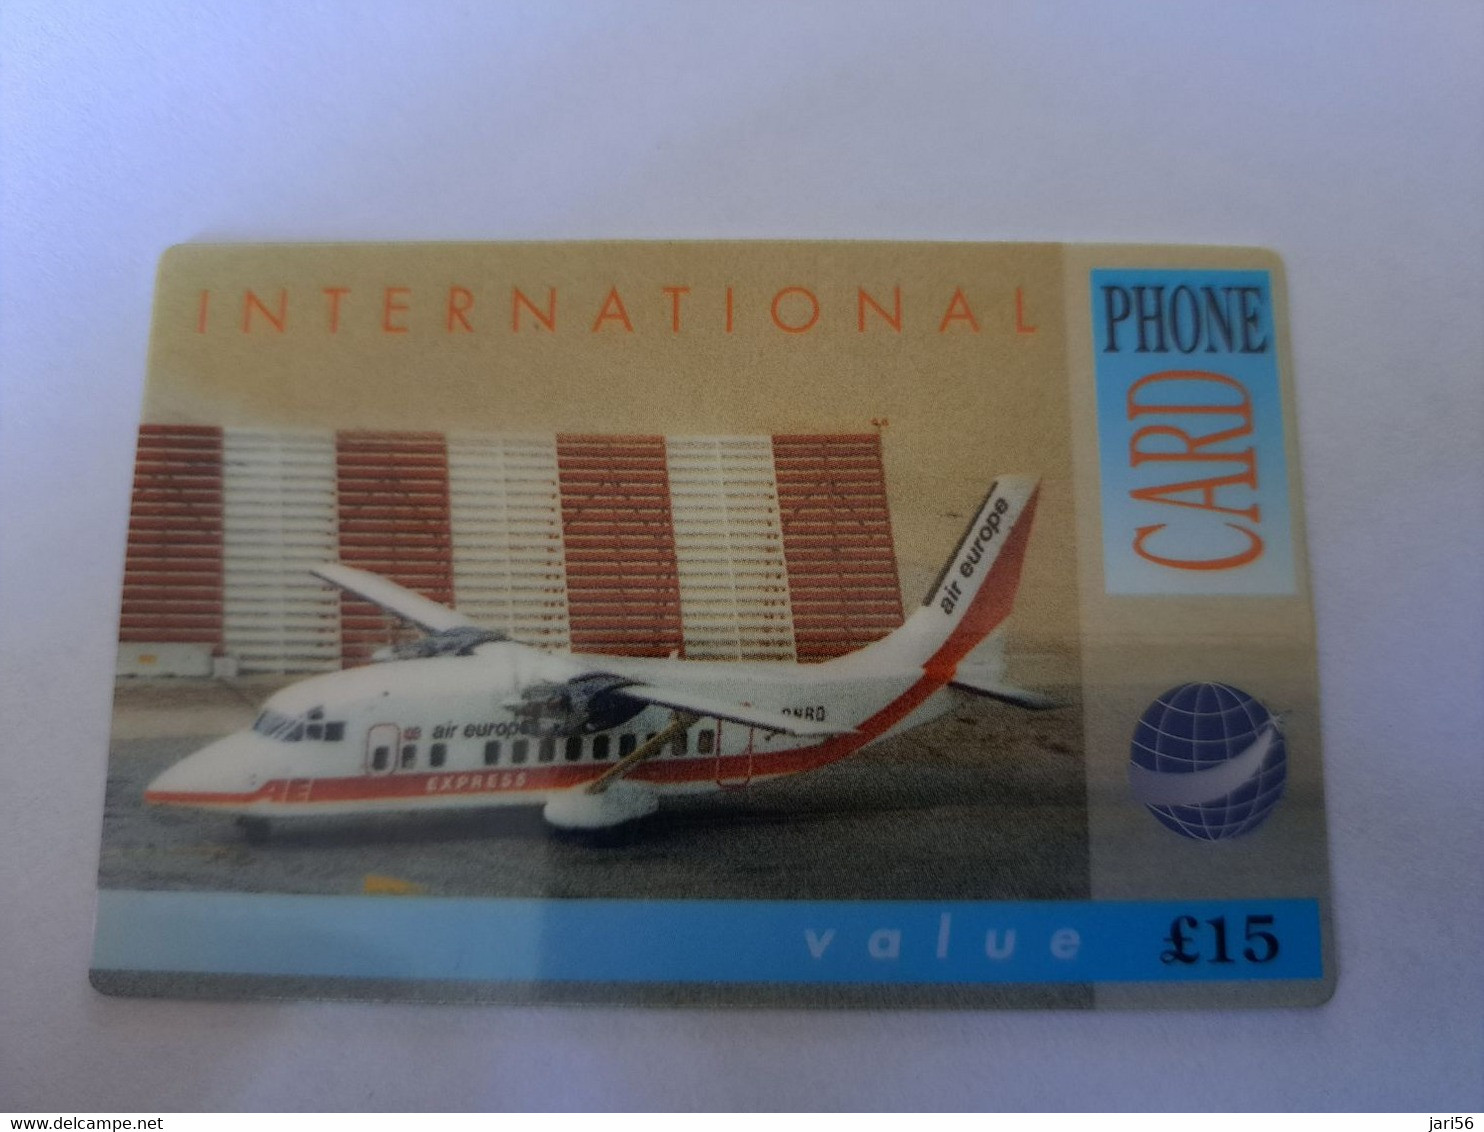 GREAT BRITAIN   15 POUND   / AEROPLANE  AIR EUROPE     DIT PHONECARD    PREPAID CARD      **12130** - Collections